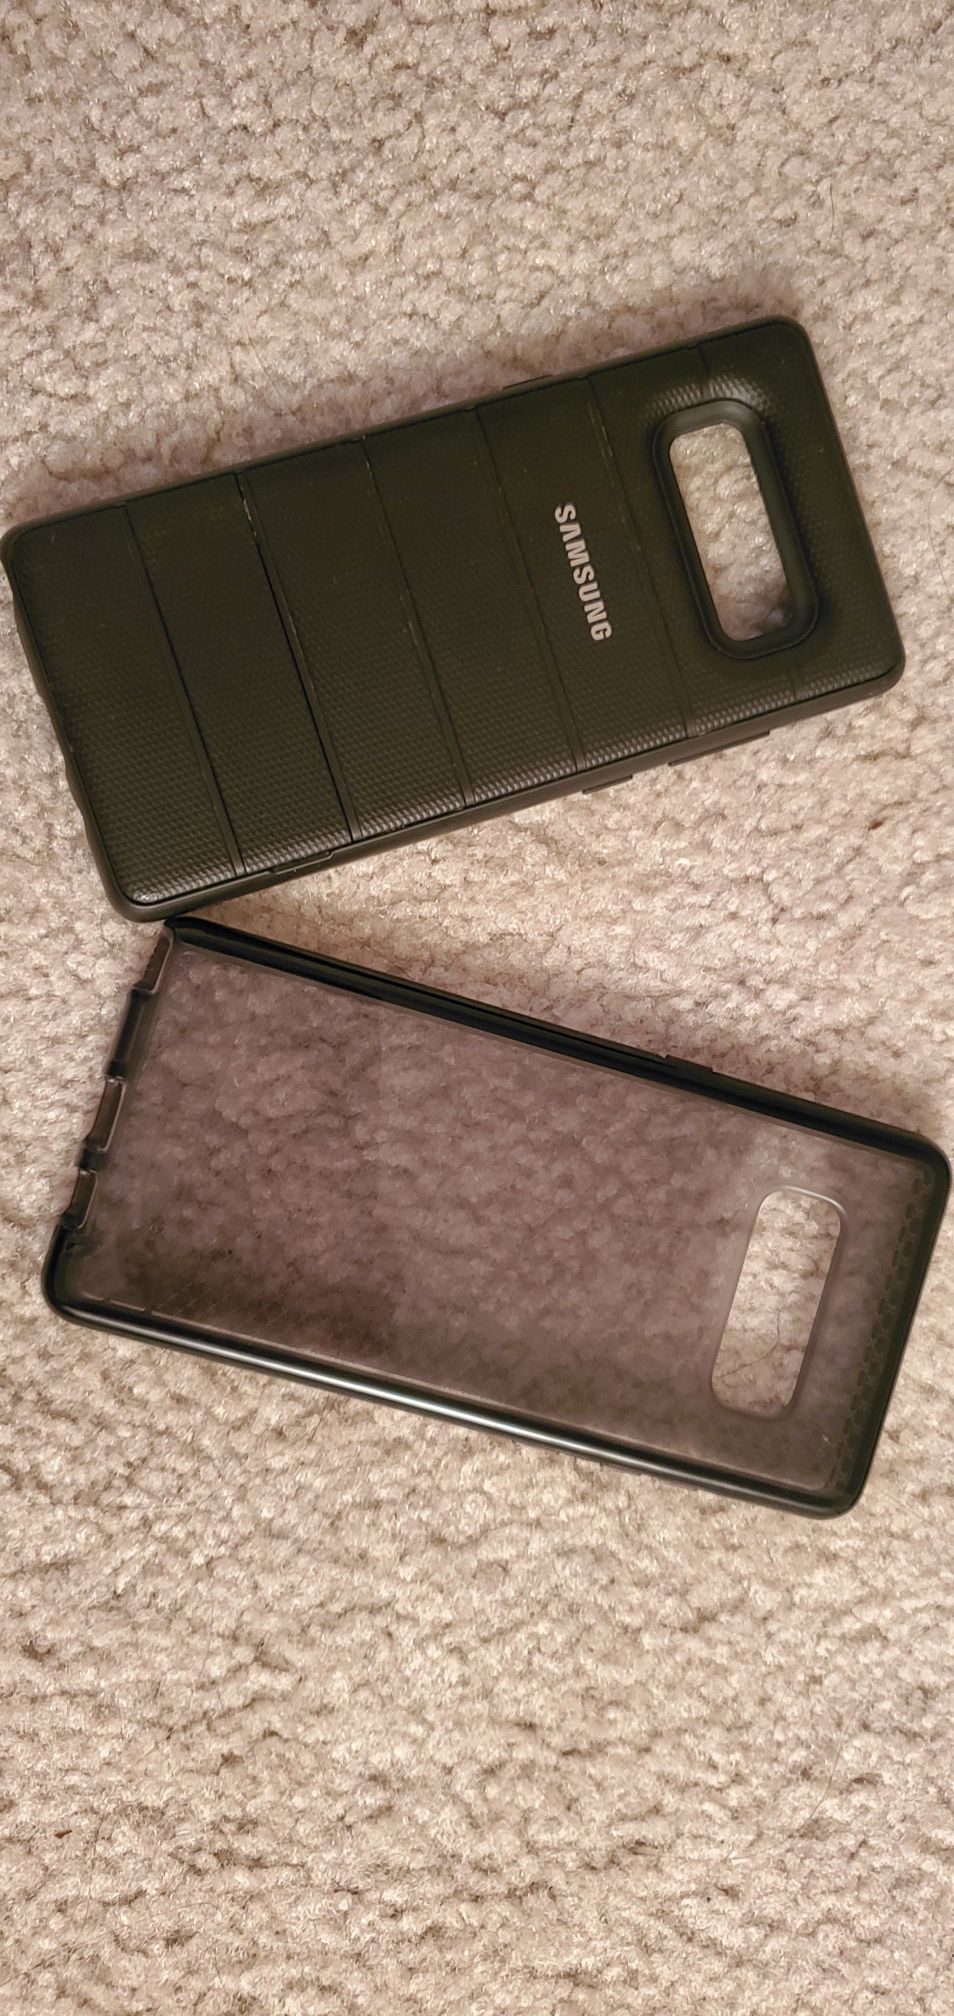 Samsung Note 8 cases. Oem and tech 21 Evo check